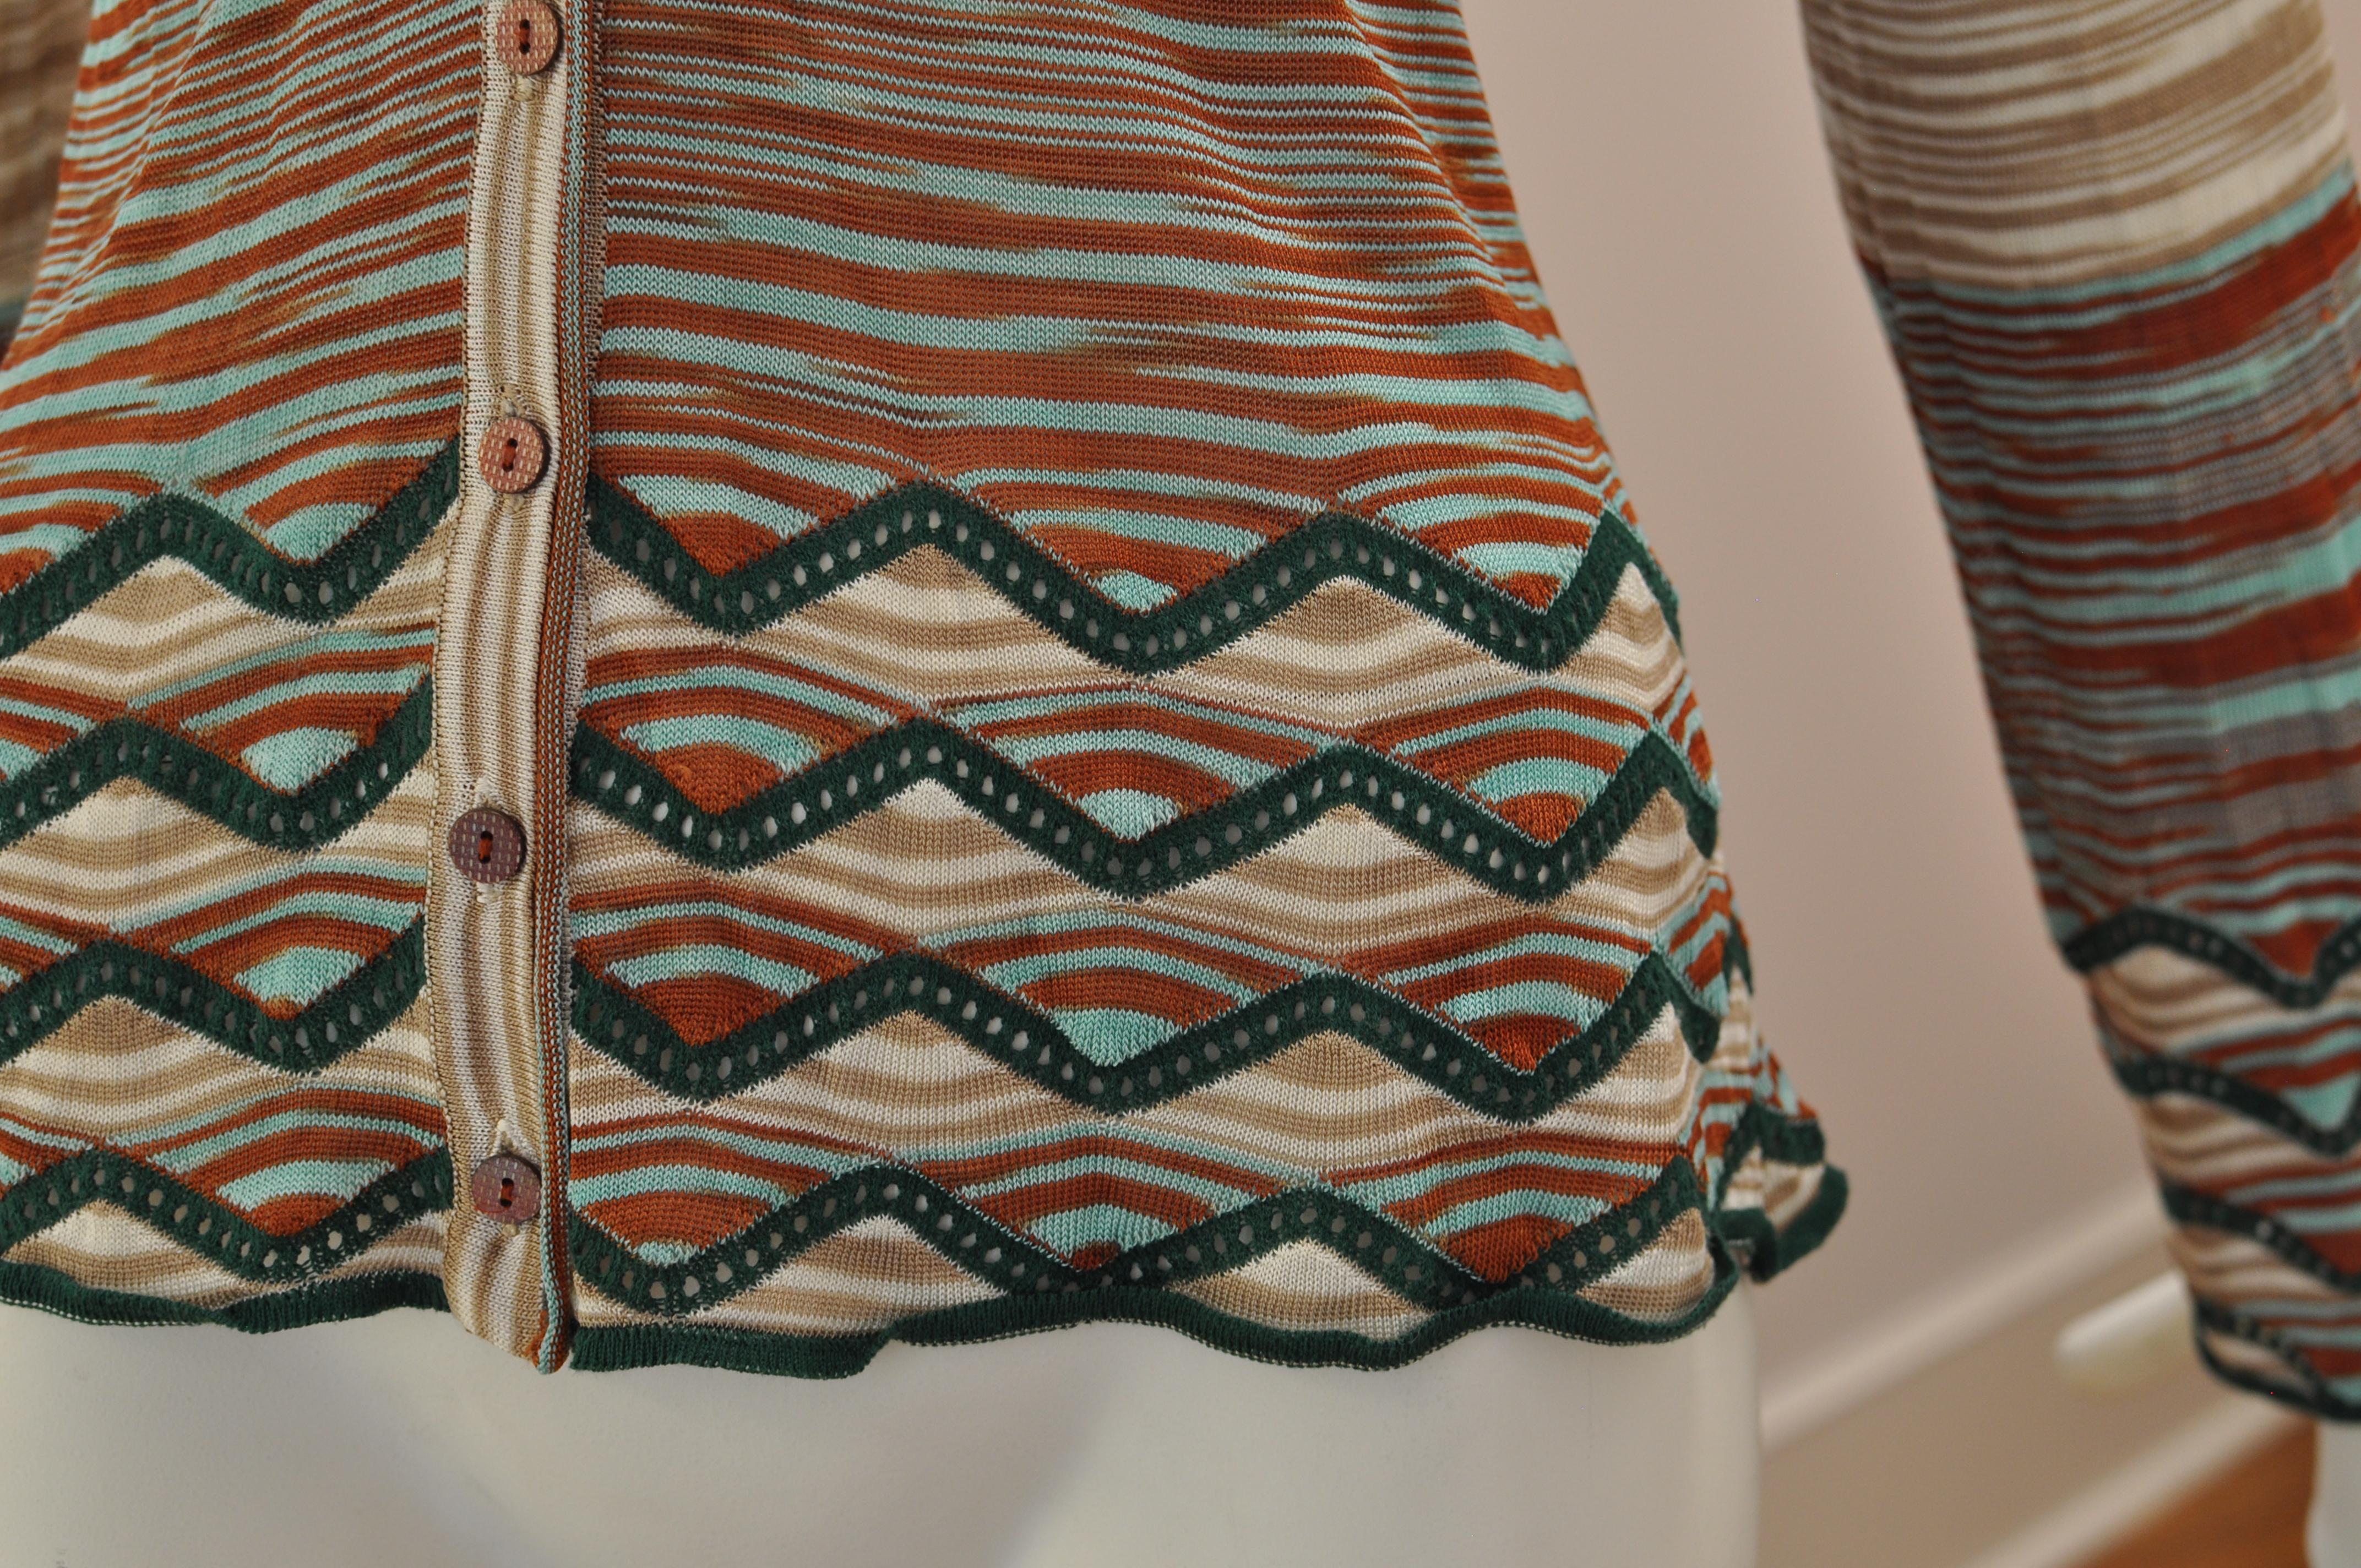 A mix of colored (russet/green and beige) line and green zig zag pattern at the hem and cuffs, this is an iconic Missoni piece.